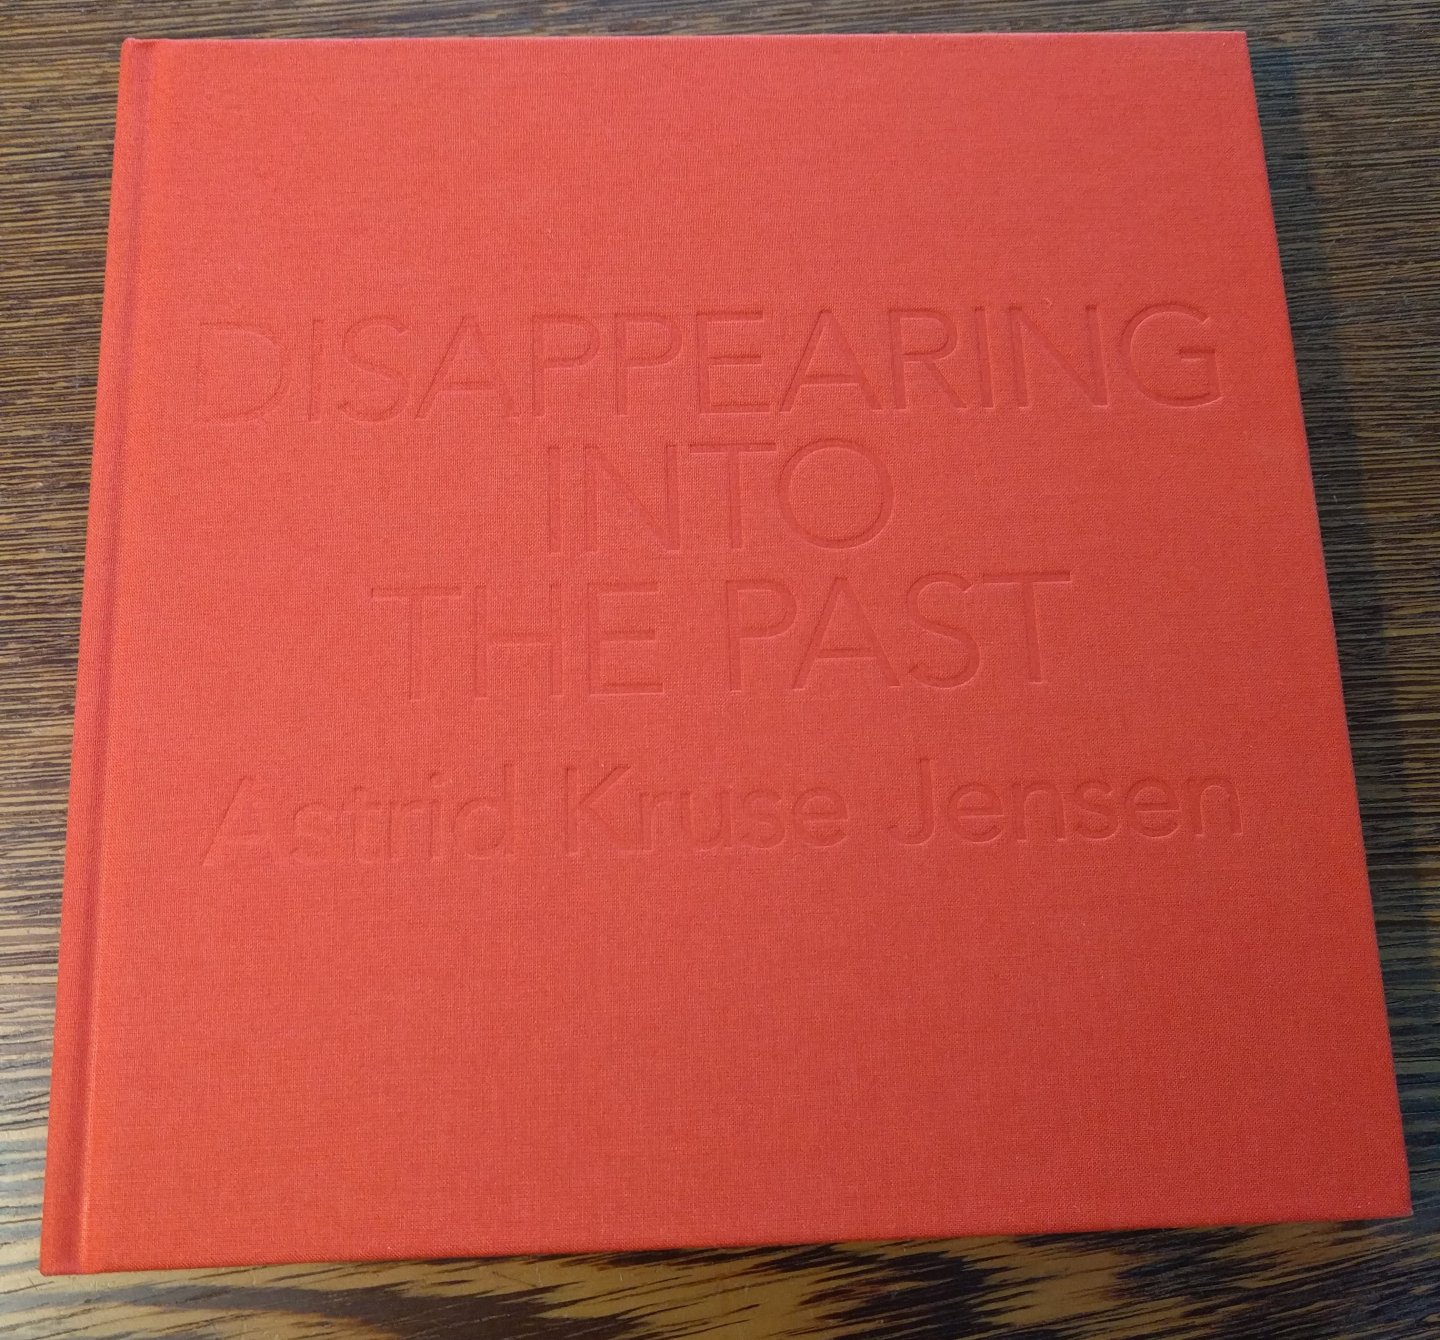 Astrid Kruse Jensen - Disappearing into the Past